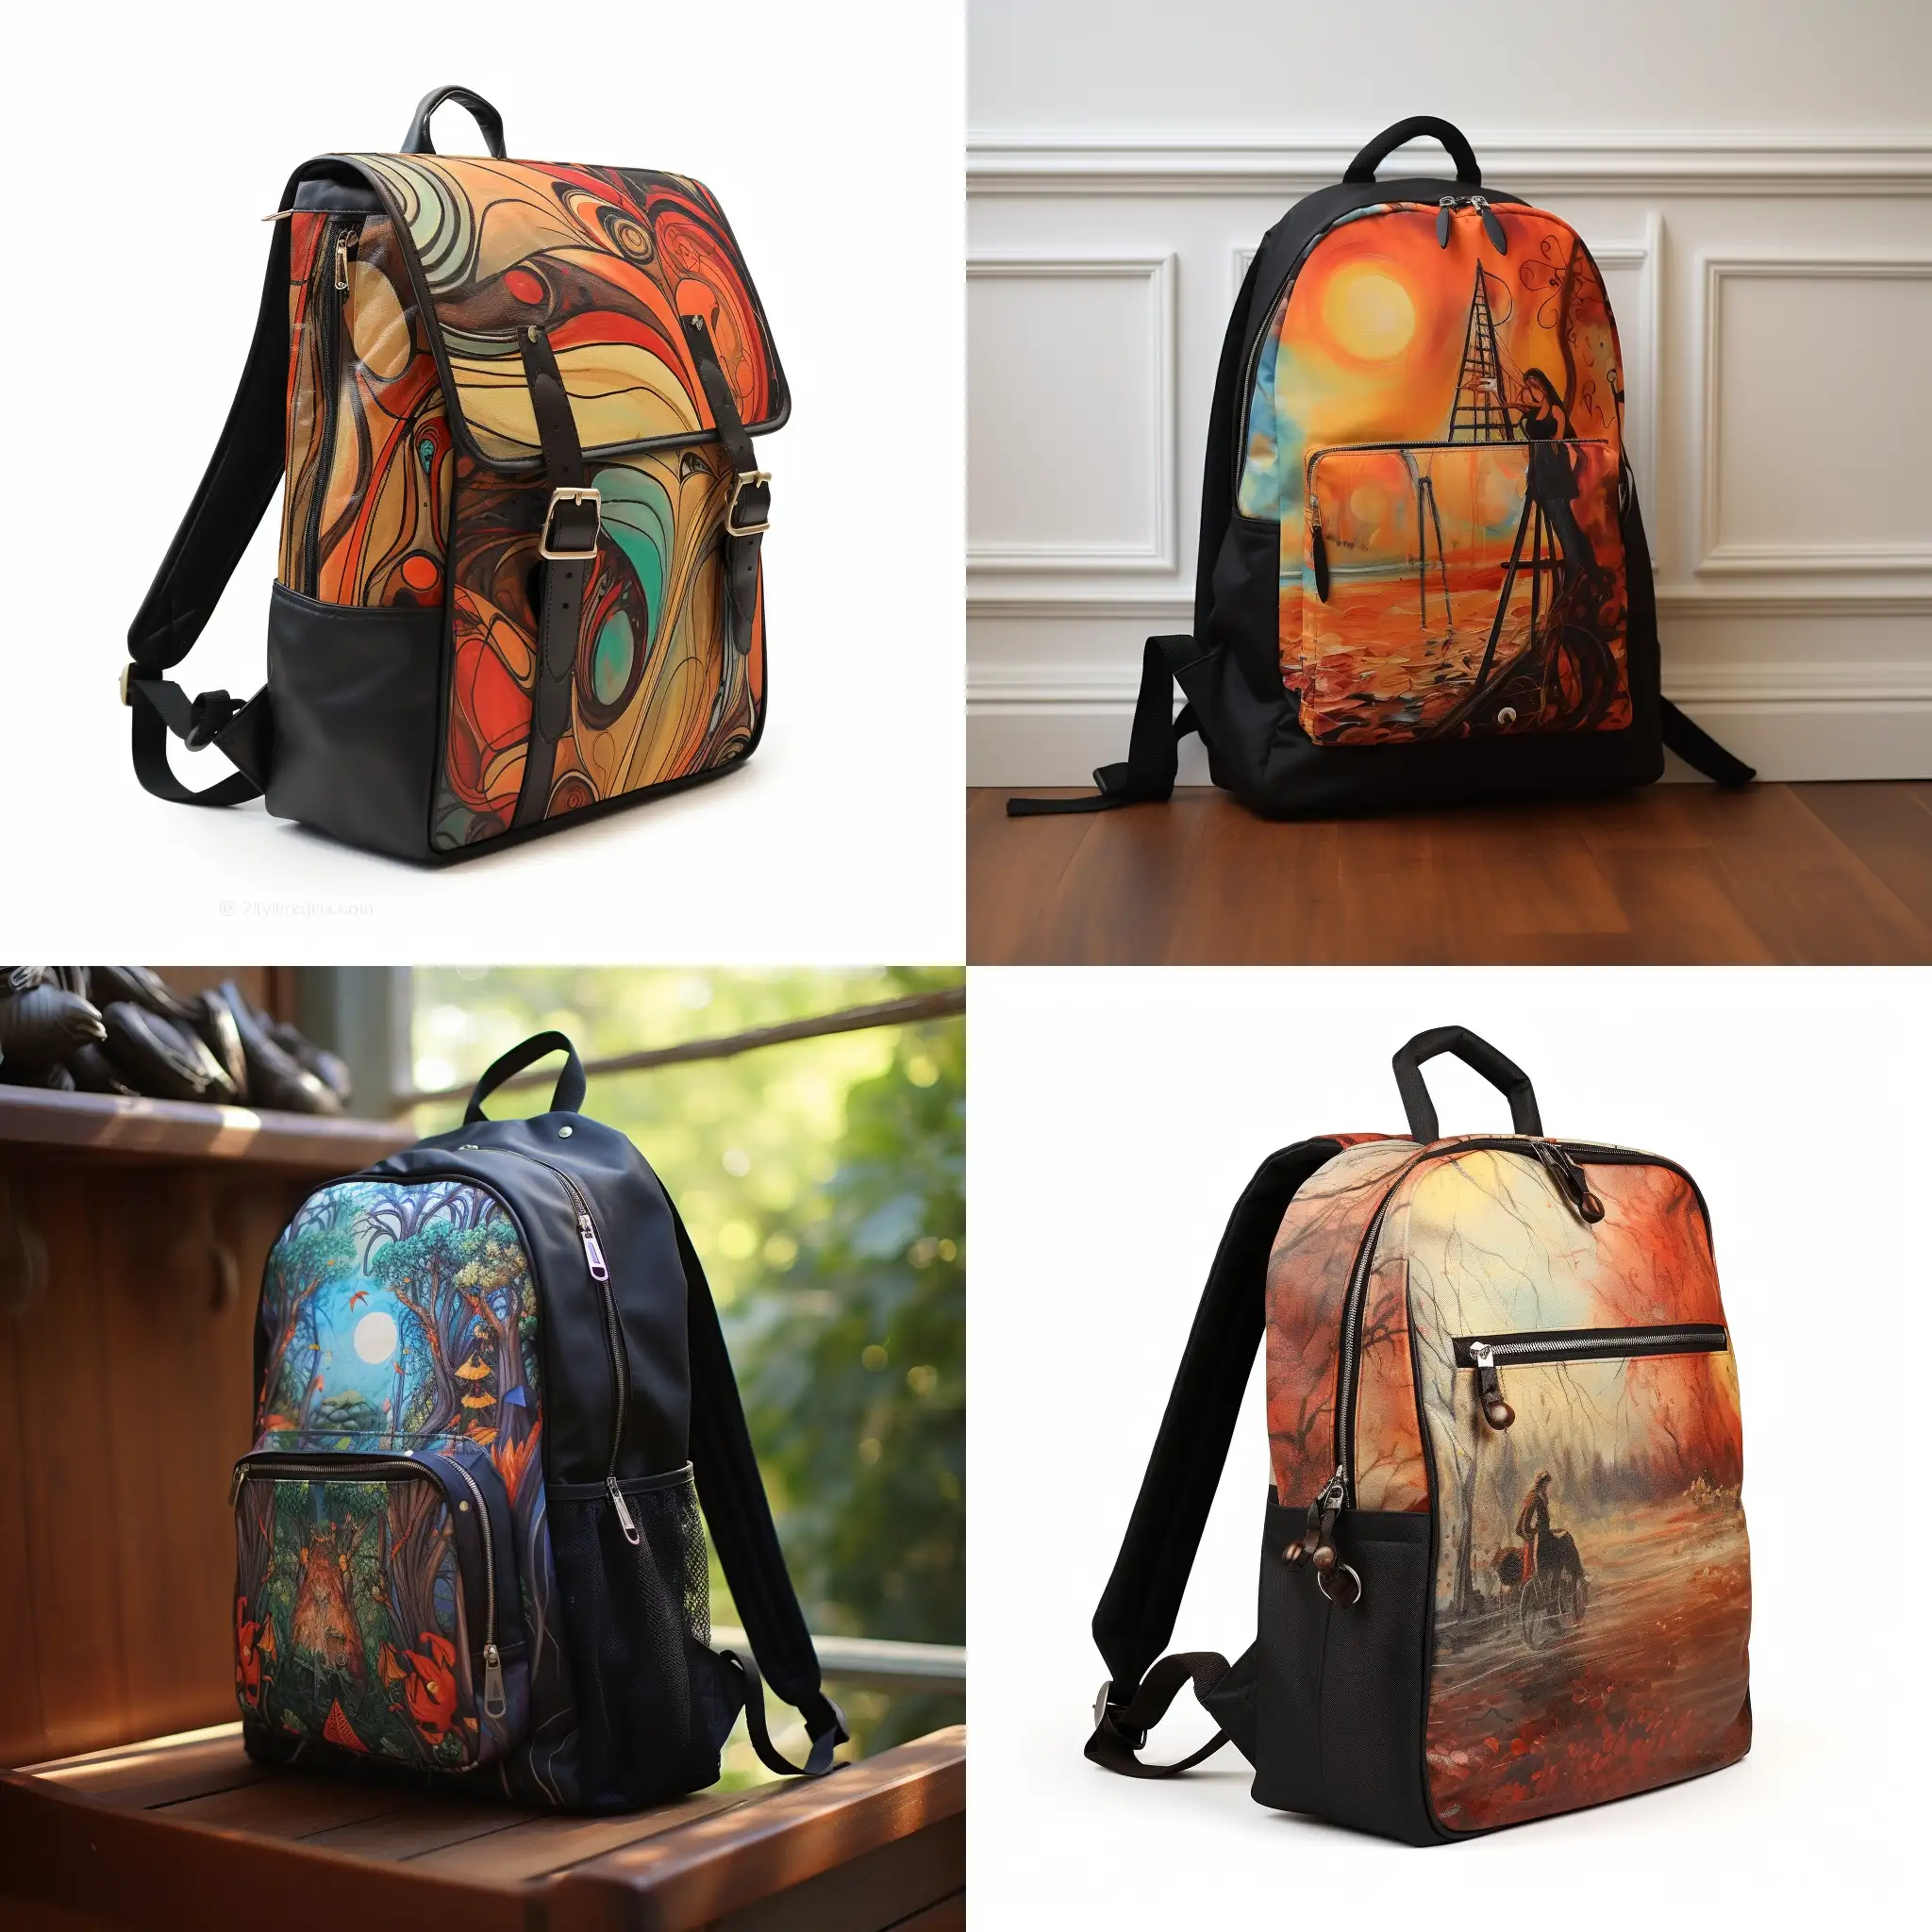 Casual-and-Formal-Backpacks-in-Stylish-Arrangement